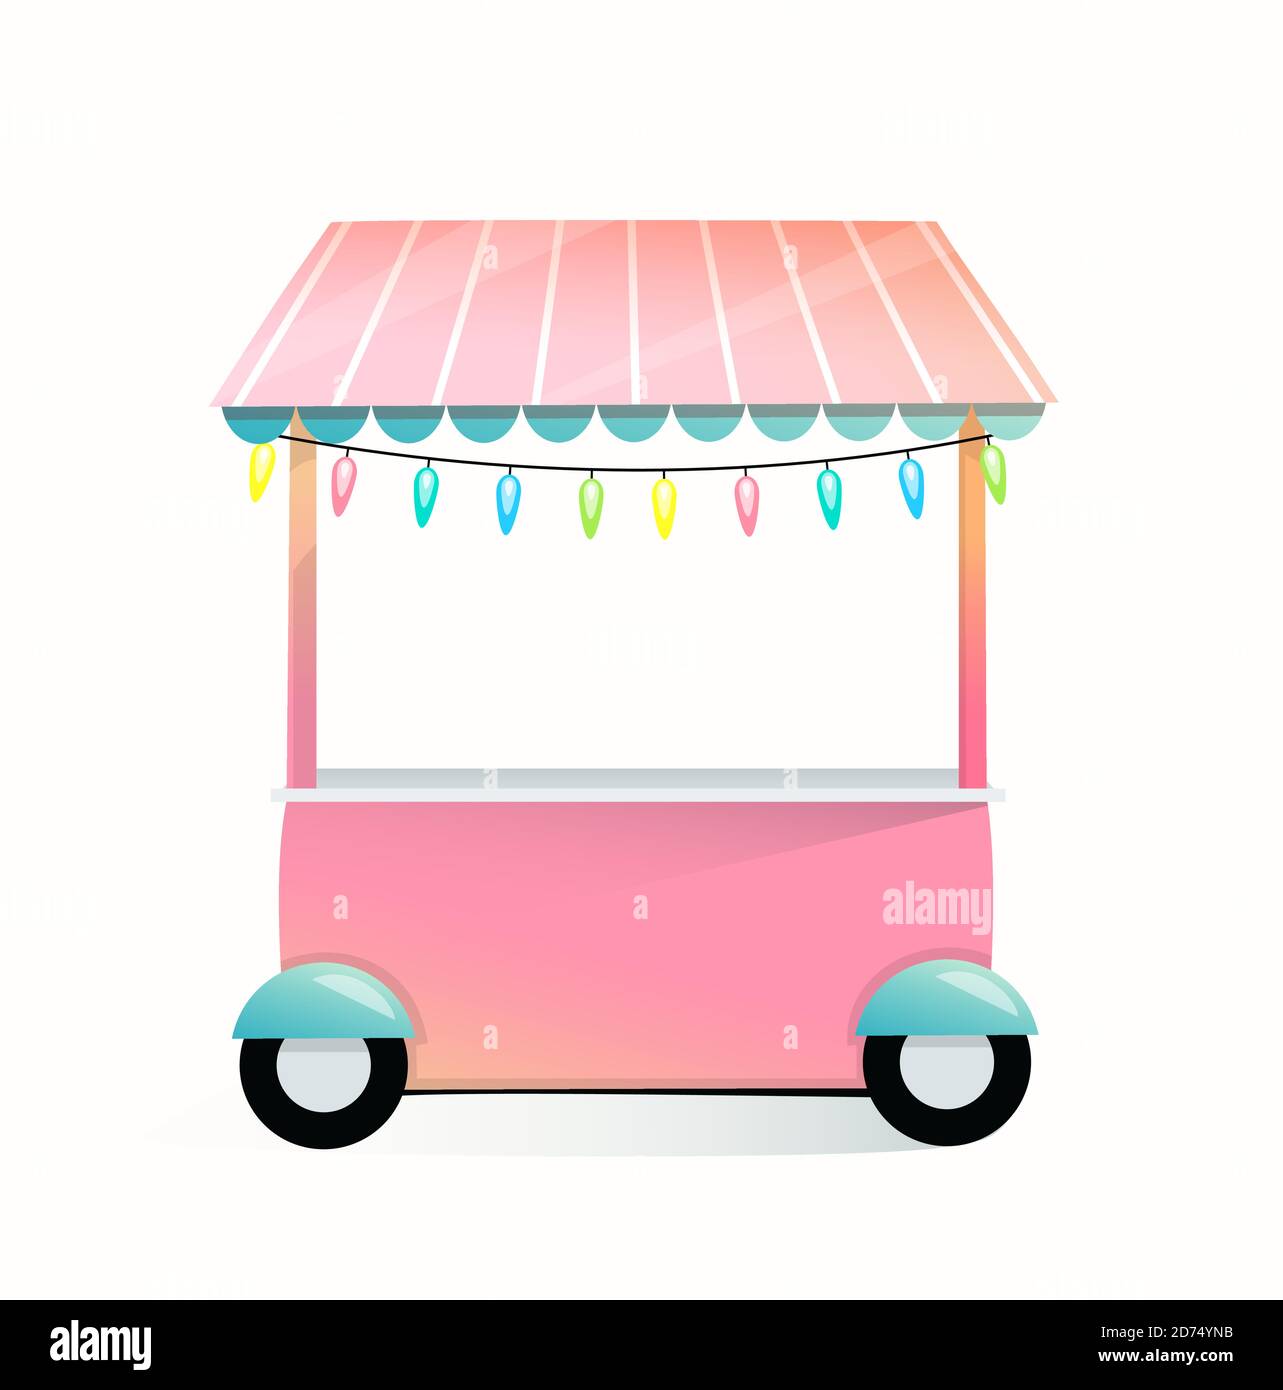 Street market stand, empty trade stall for sweet food or bakery, kids sweets shop cartoon design. Stock Vector